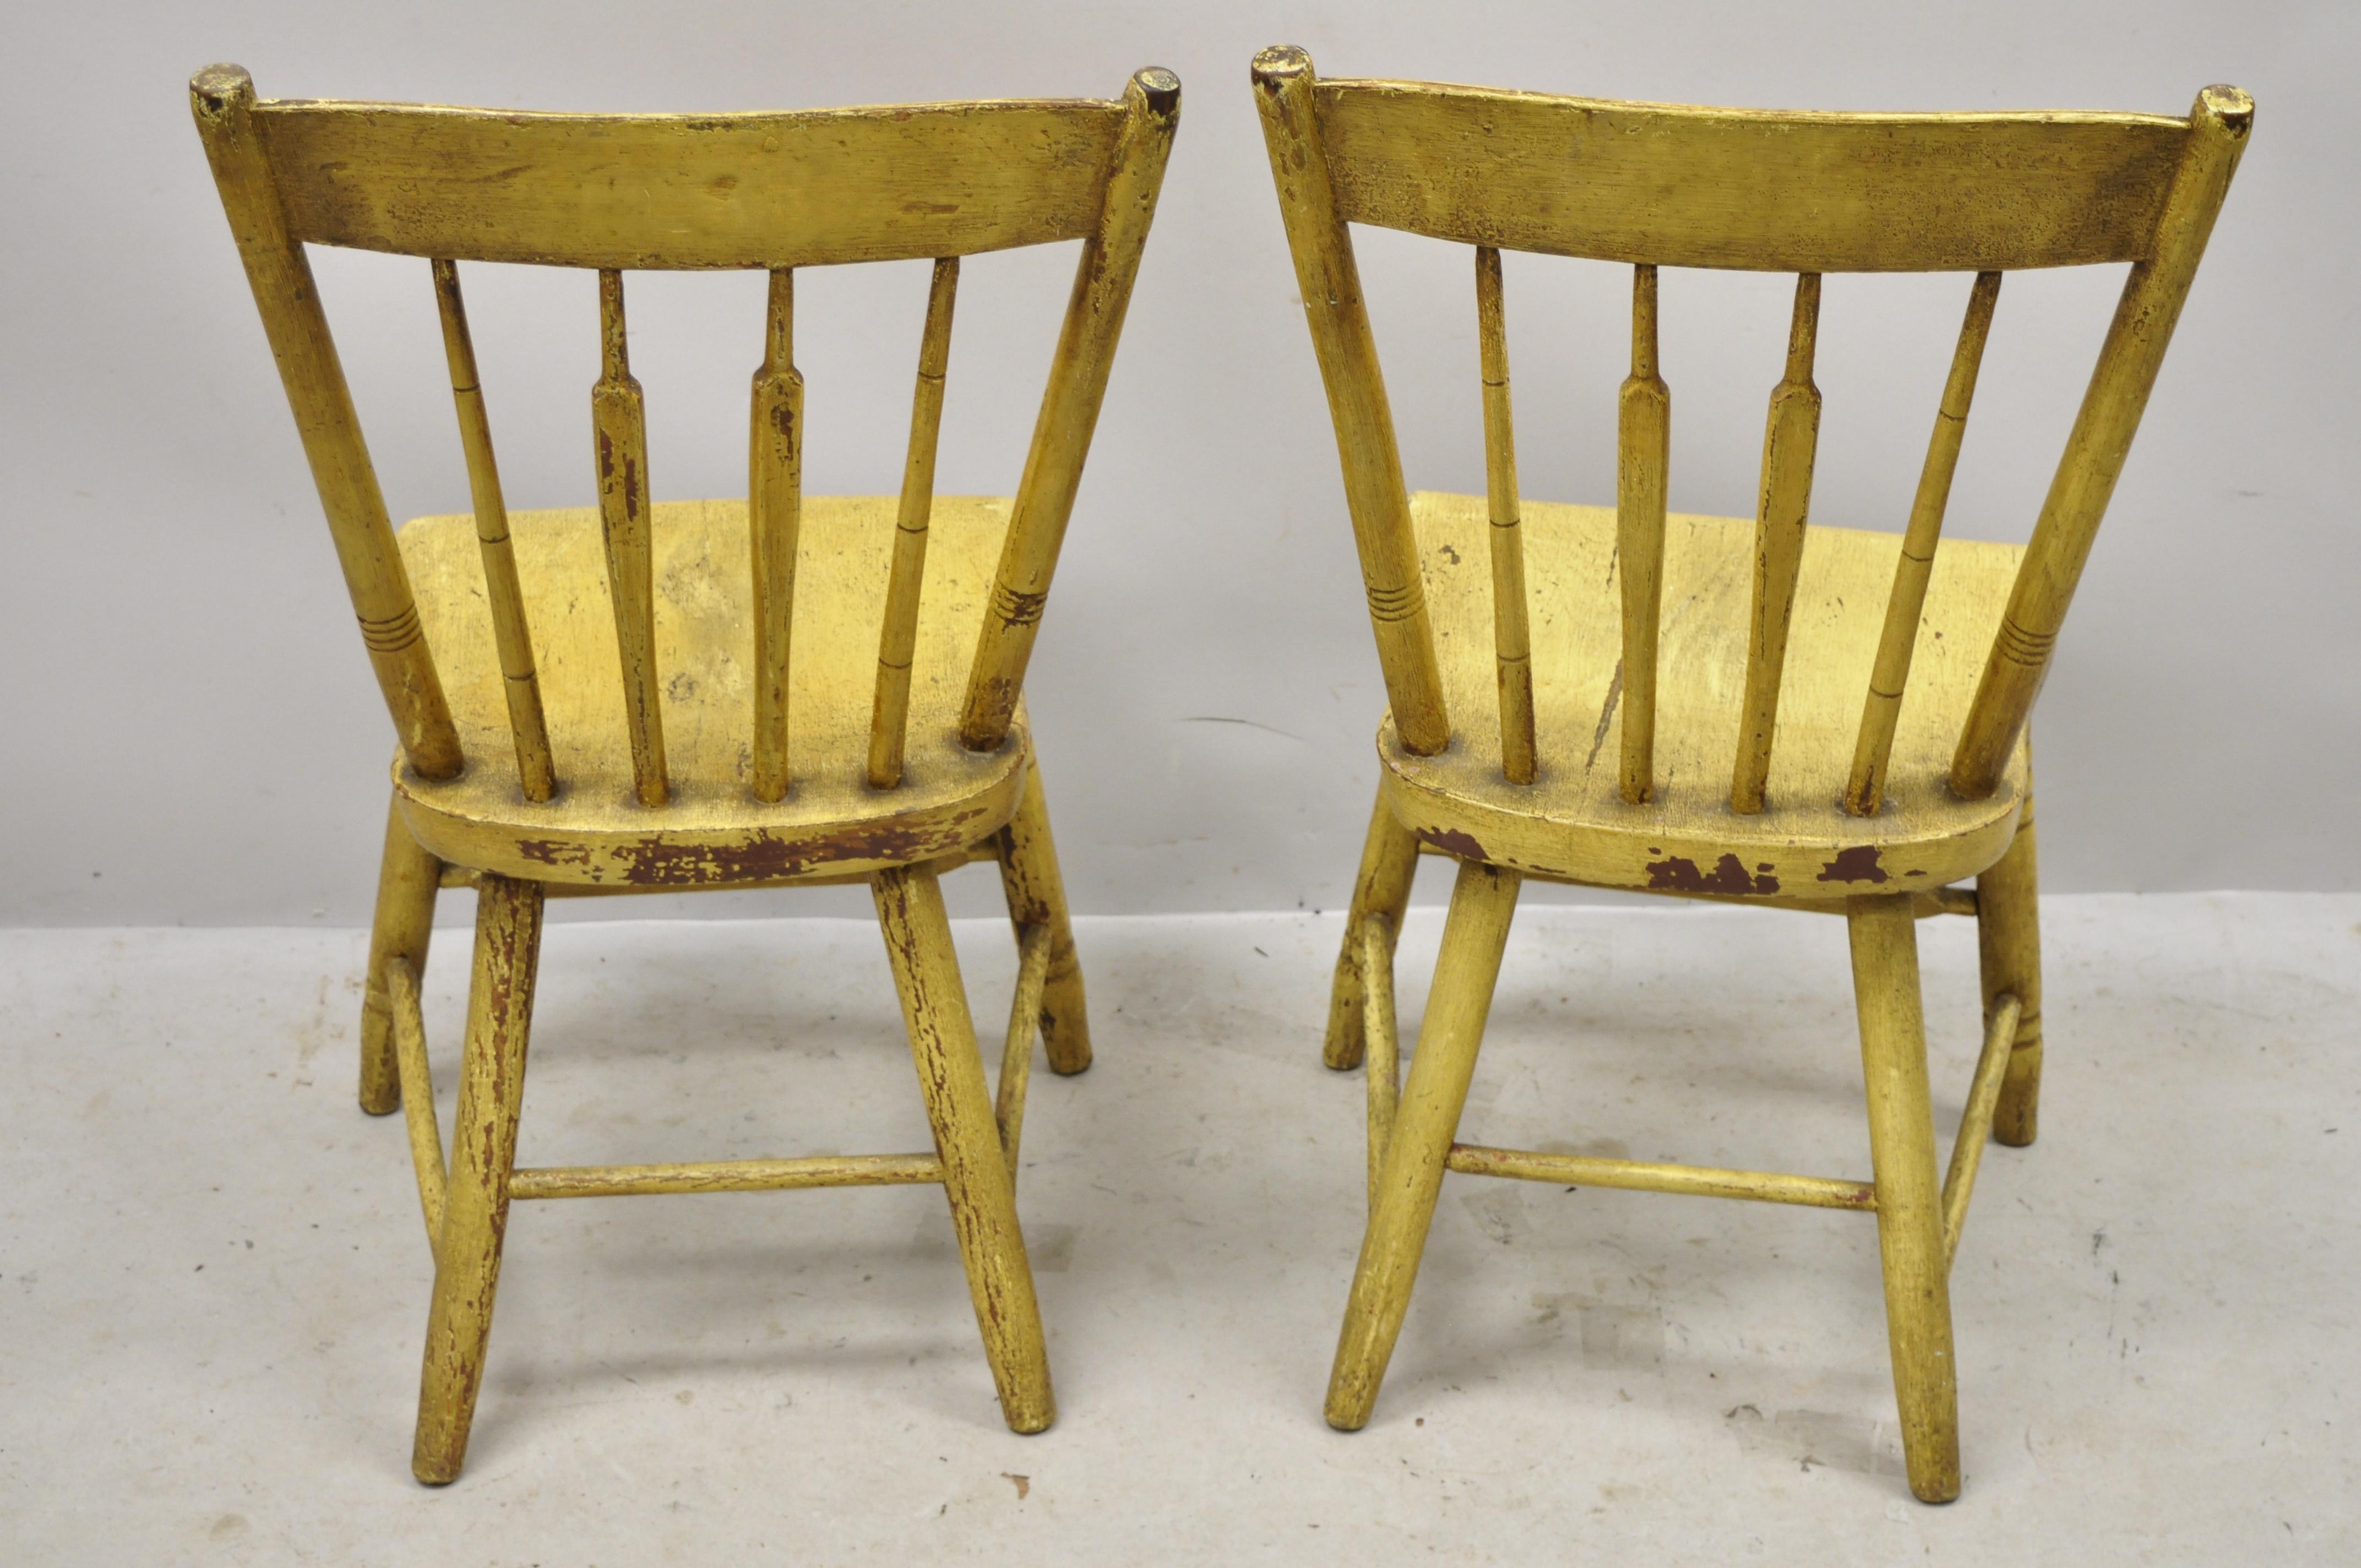 North American Frederick Loeser & Co Yellow Primitive Hitchcock Style Side Chairs, Pair 'B' For Sale